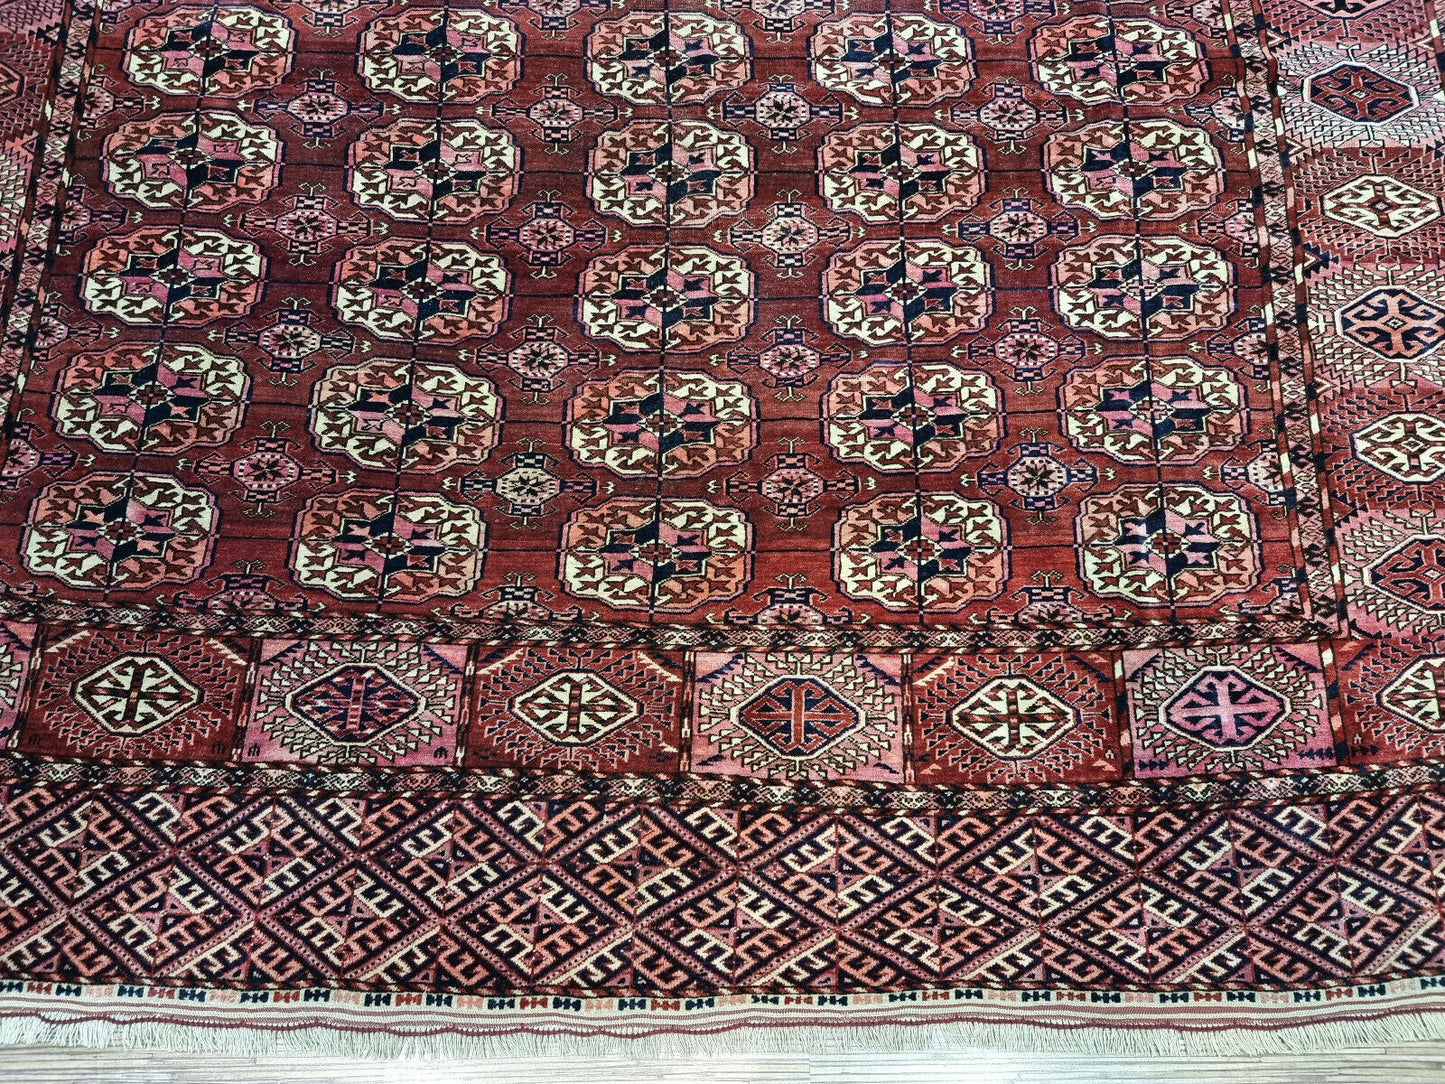 Close-up of well-preserved appearance on Handmade Antique Turkmen Tekke Rug - Detailed view showcasing the well-preserved condition of the rug despite its age.